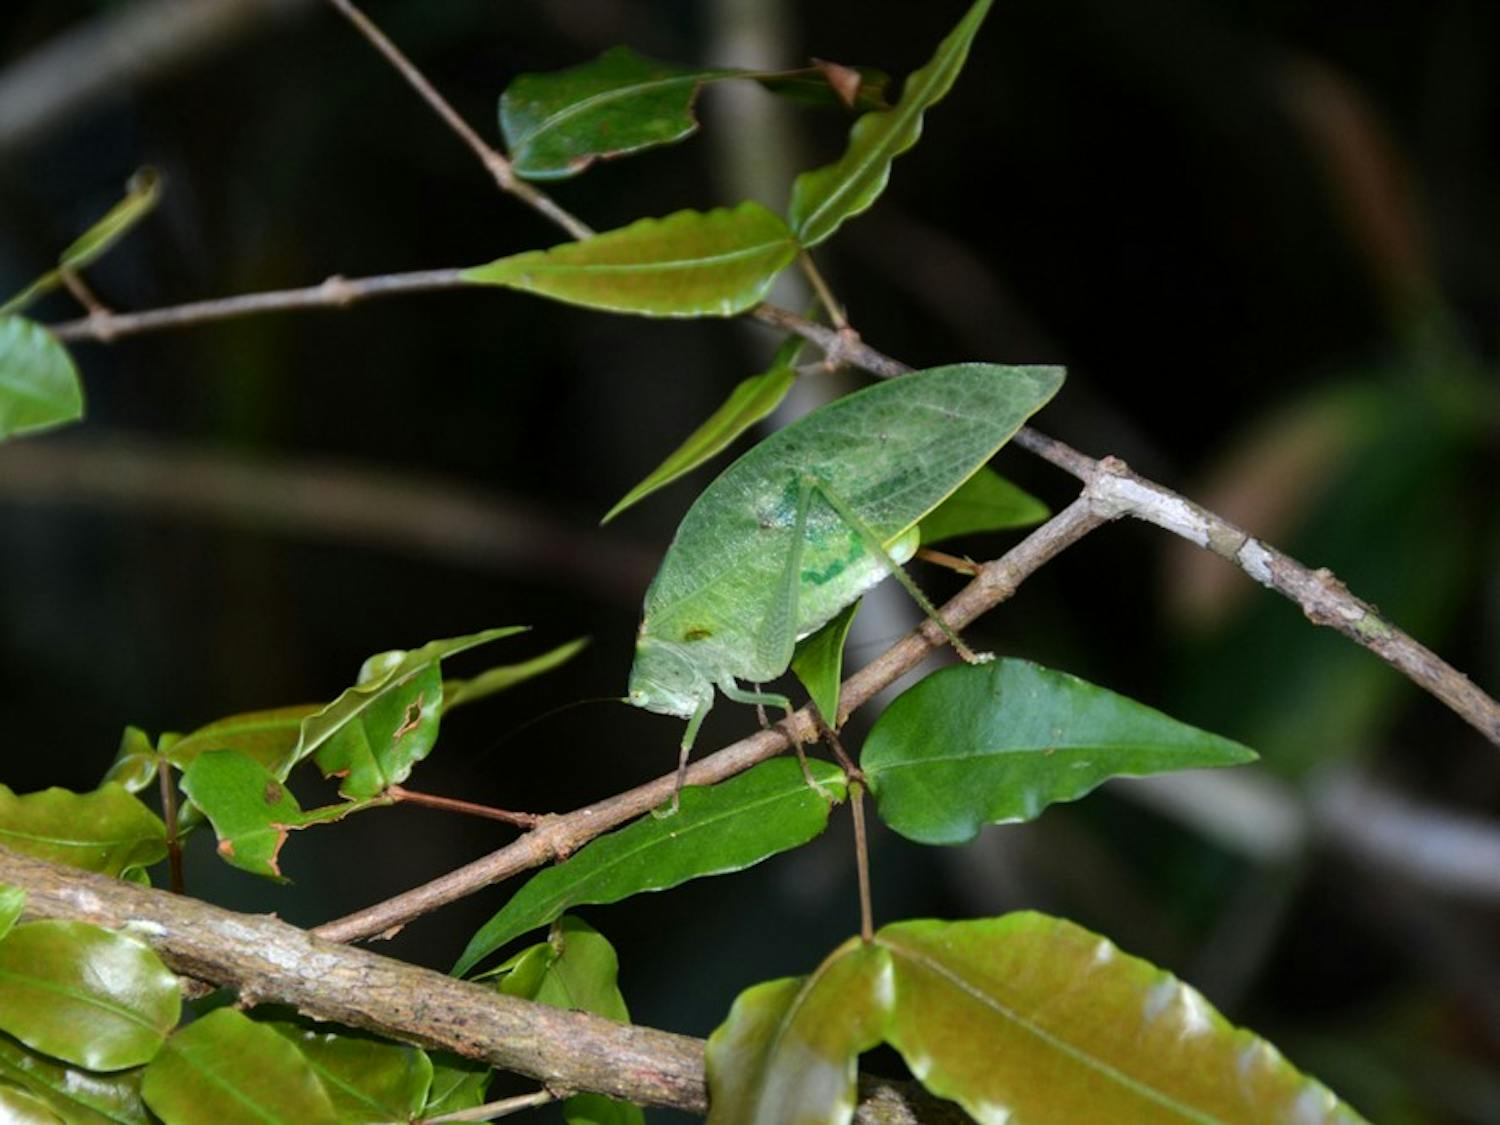 Researchers traveled to Panama to study katydids and how they evolved to survive in the ecosystem.